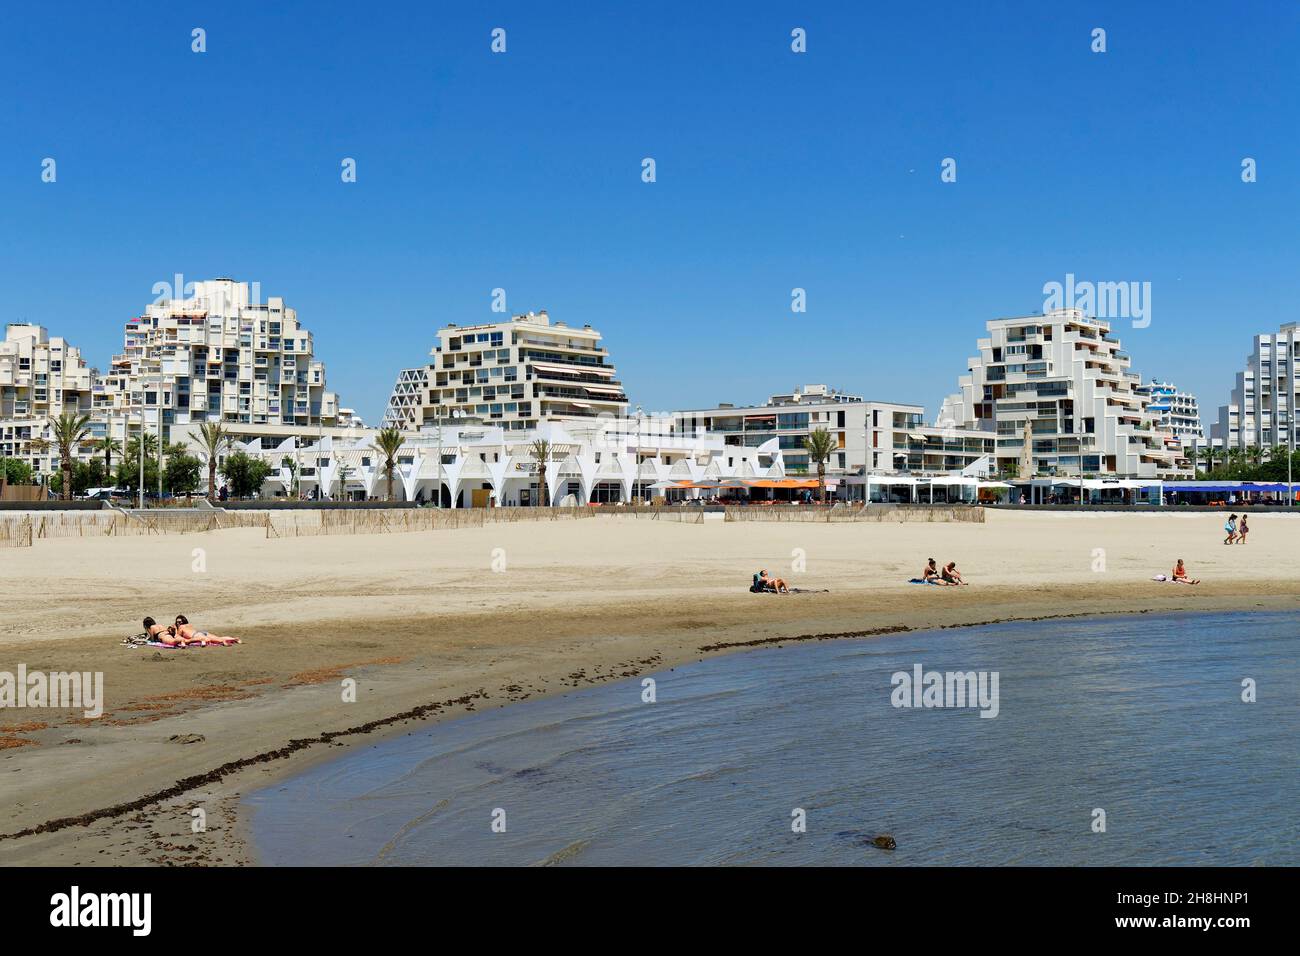 France, Herault, La Grande Motte, the resort beach with pyramidal architecture, Heritage of the 20th century and the beach Stock Photo